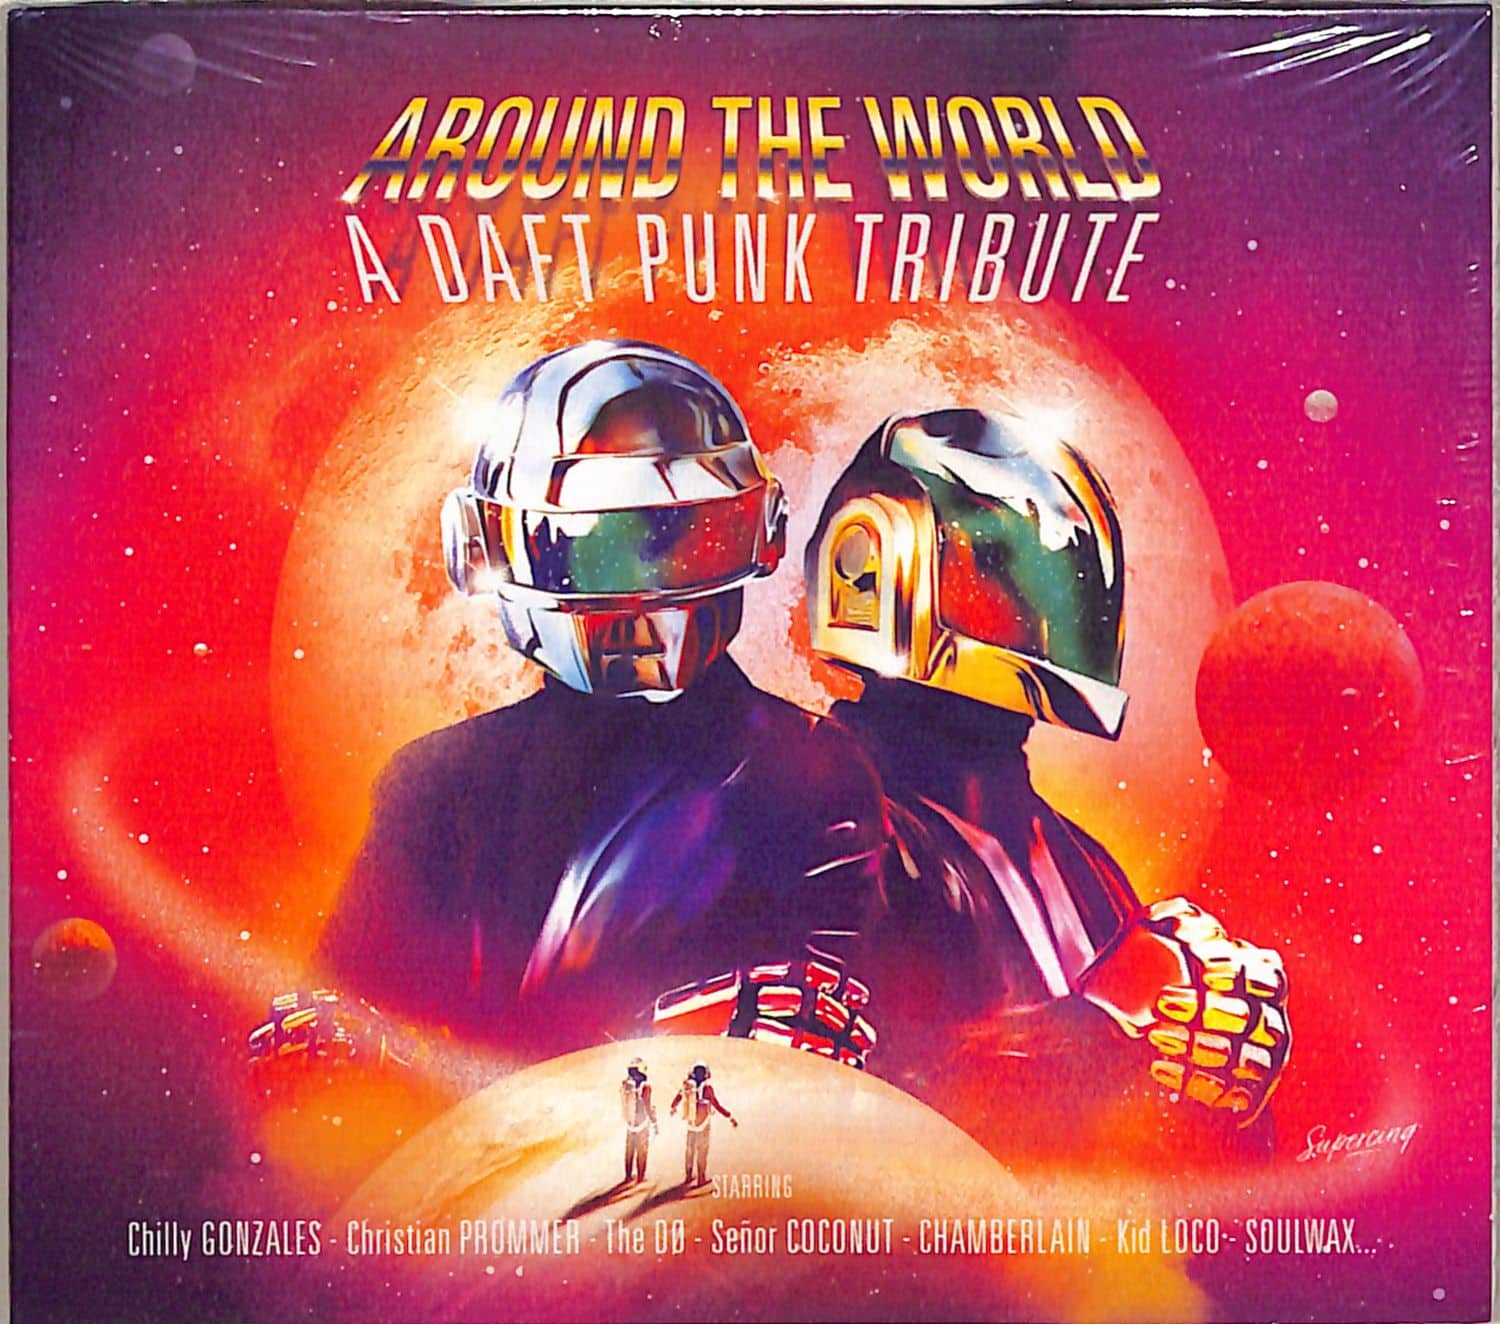 Various Artists - AROUND THE WORLD - A DAFT PUNK TRIBUTE 